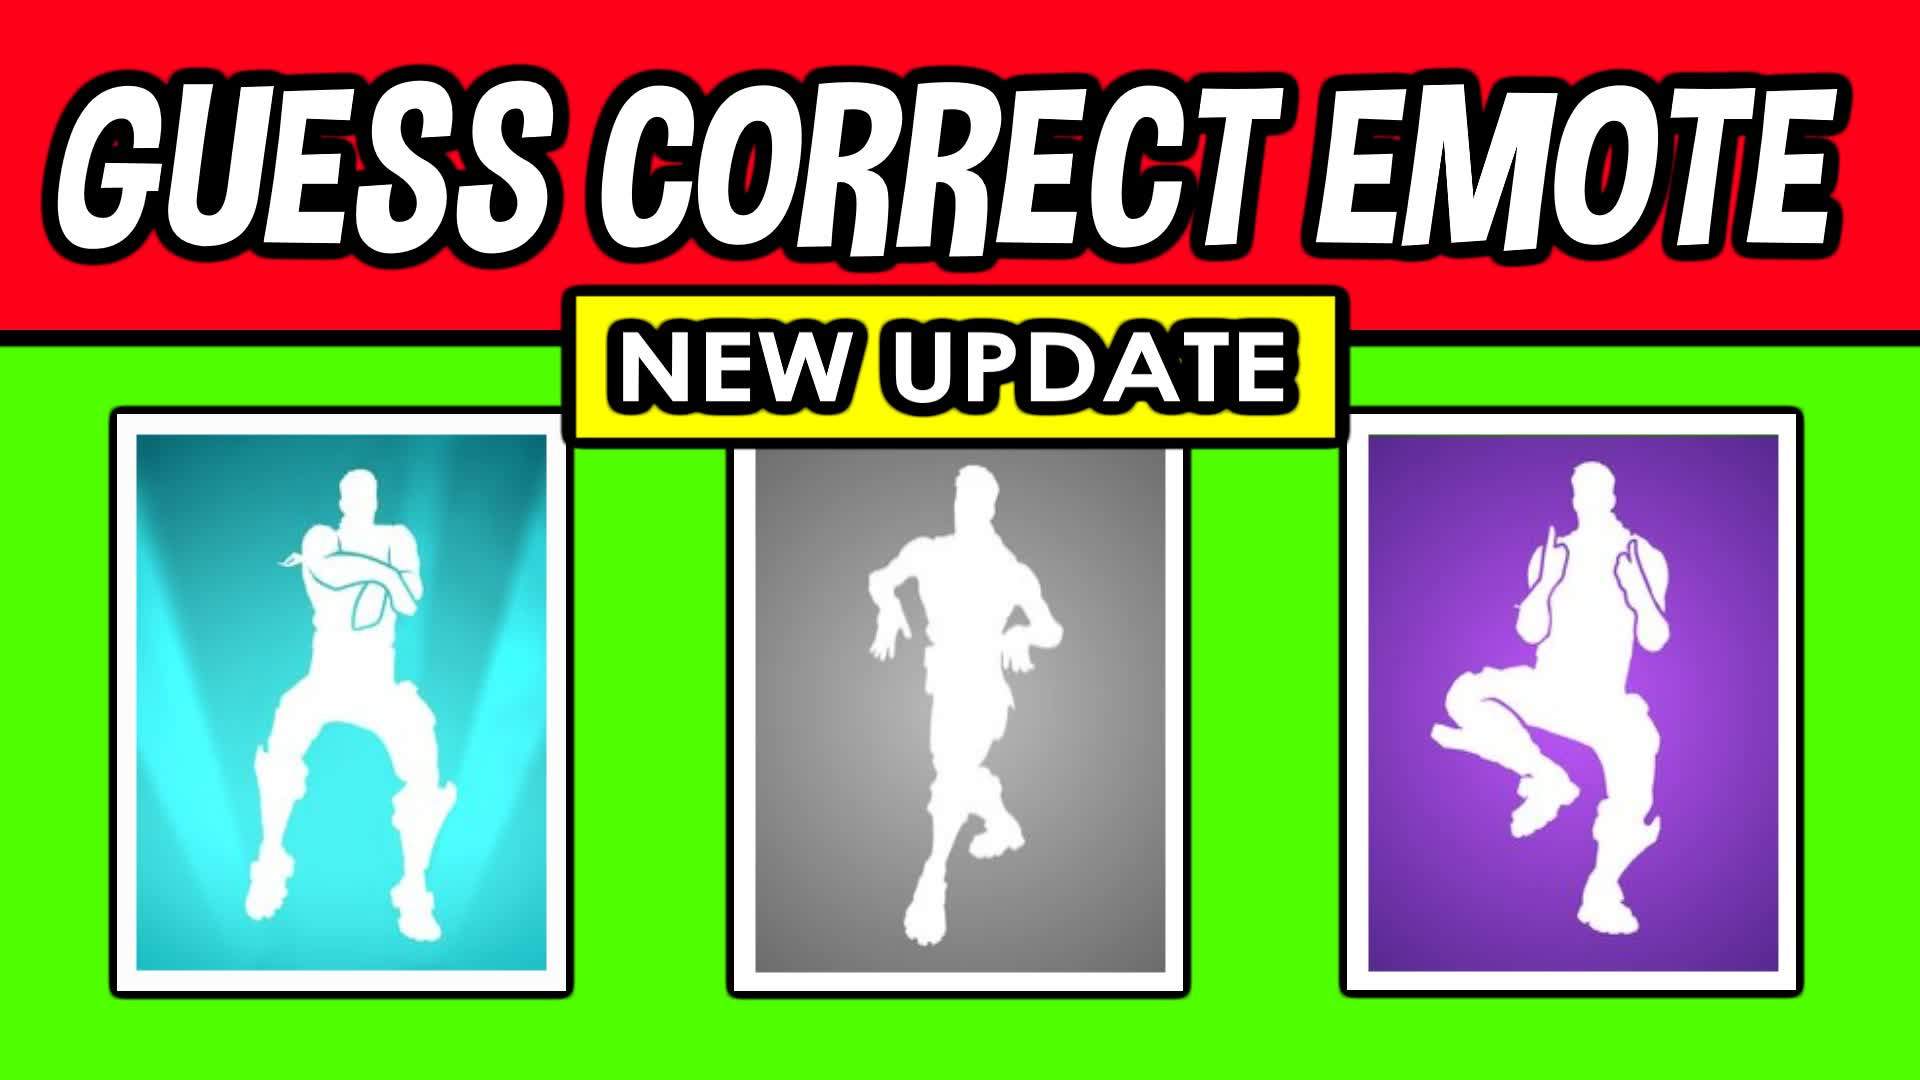 GUESS THE CORRECT EMOTE 🏆